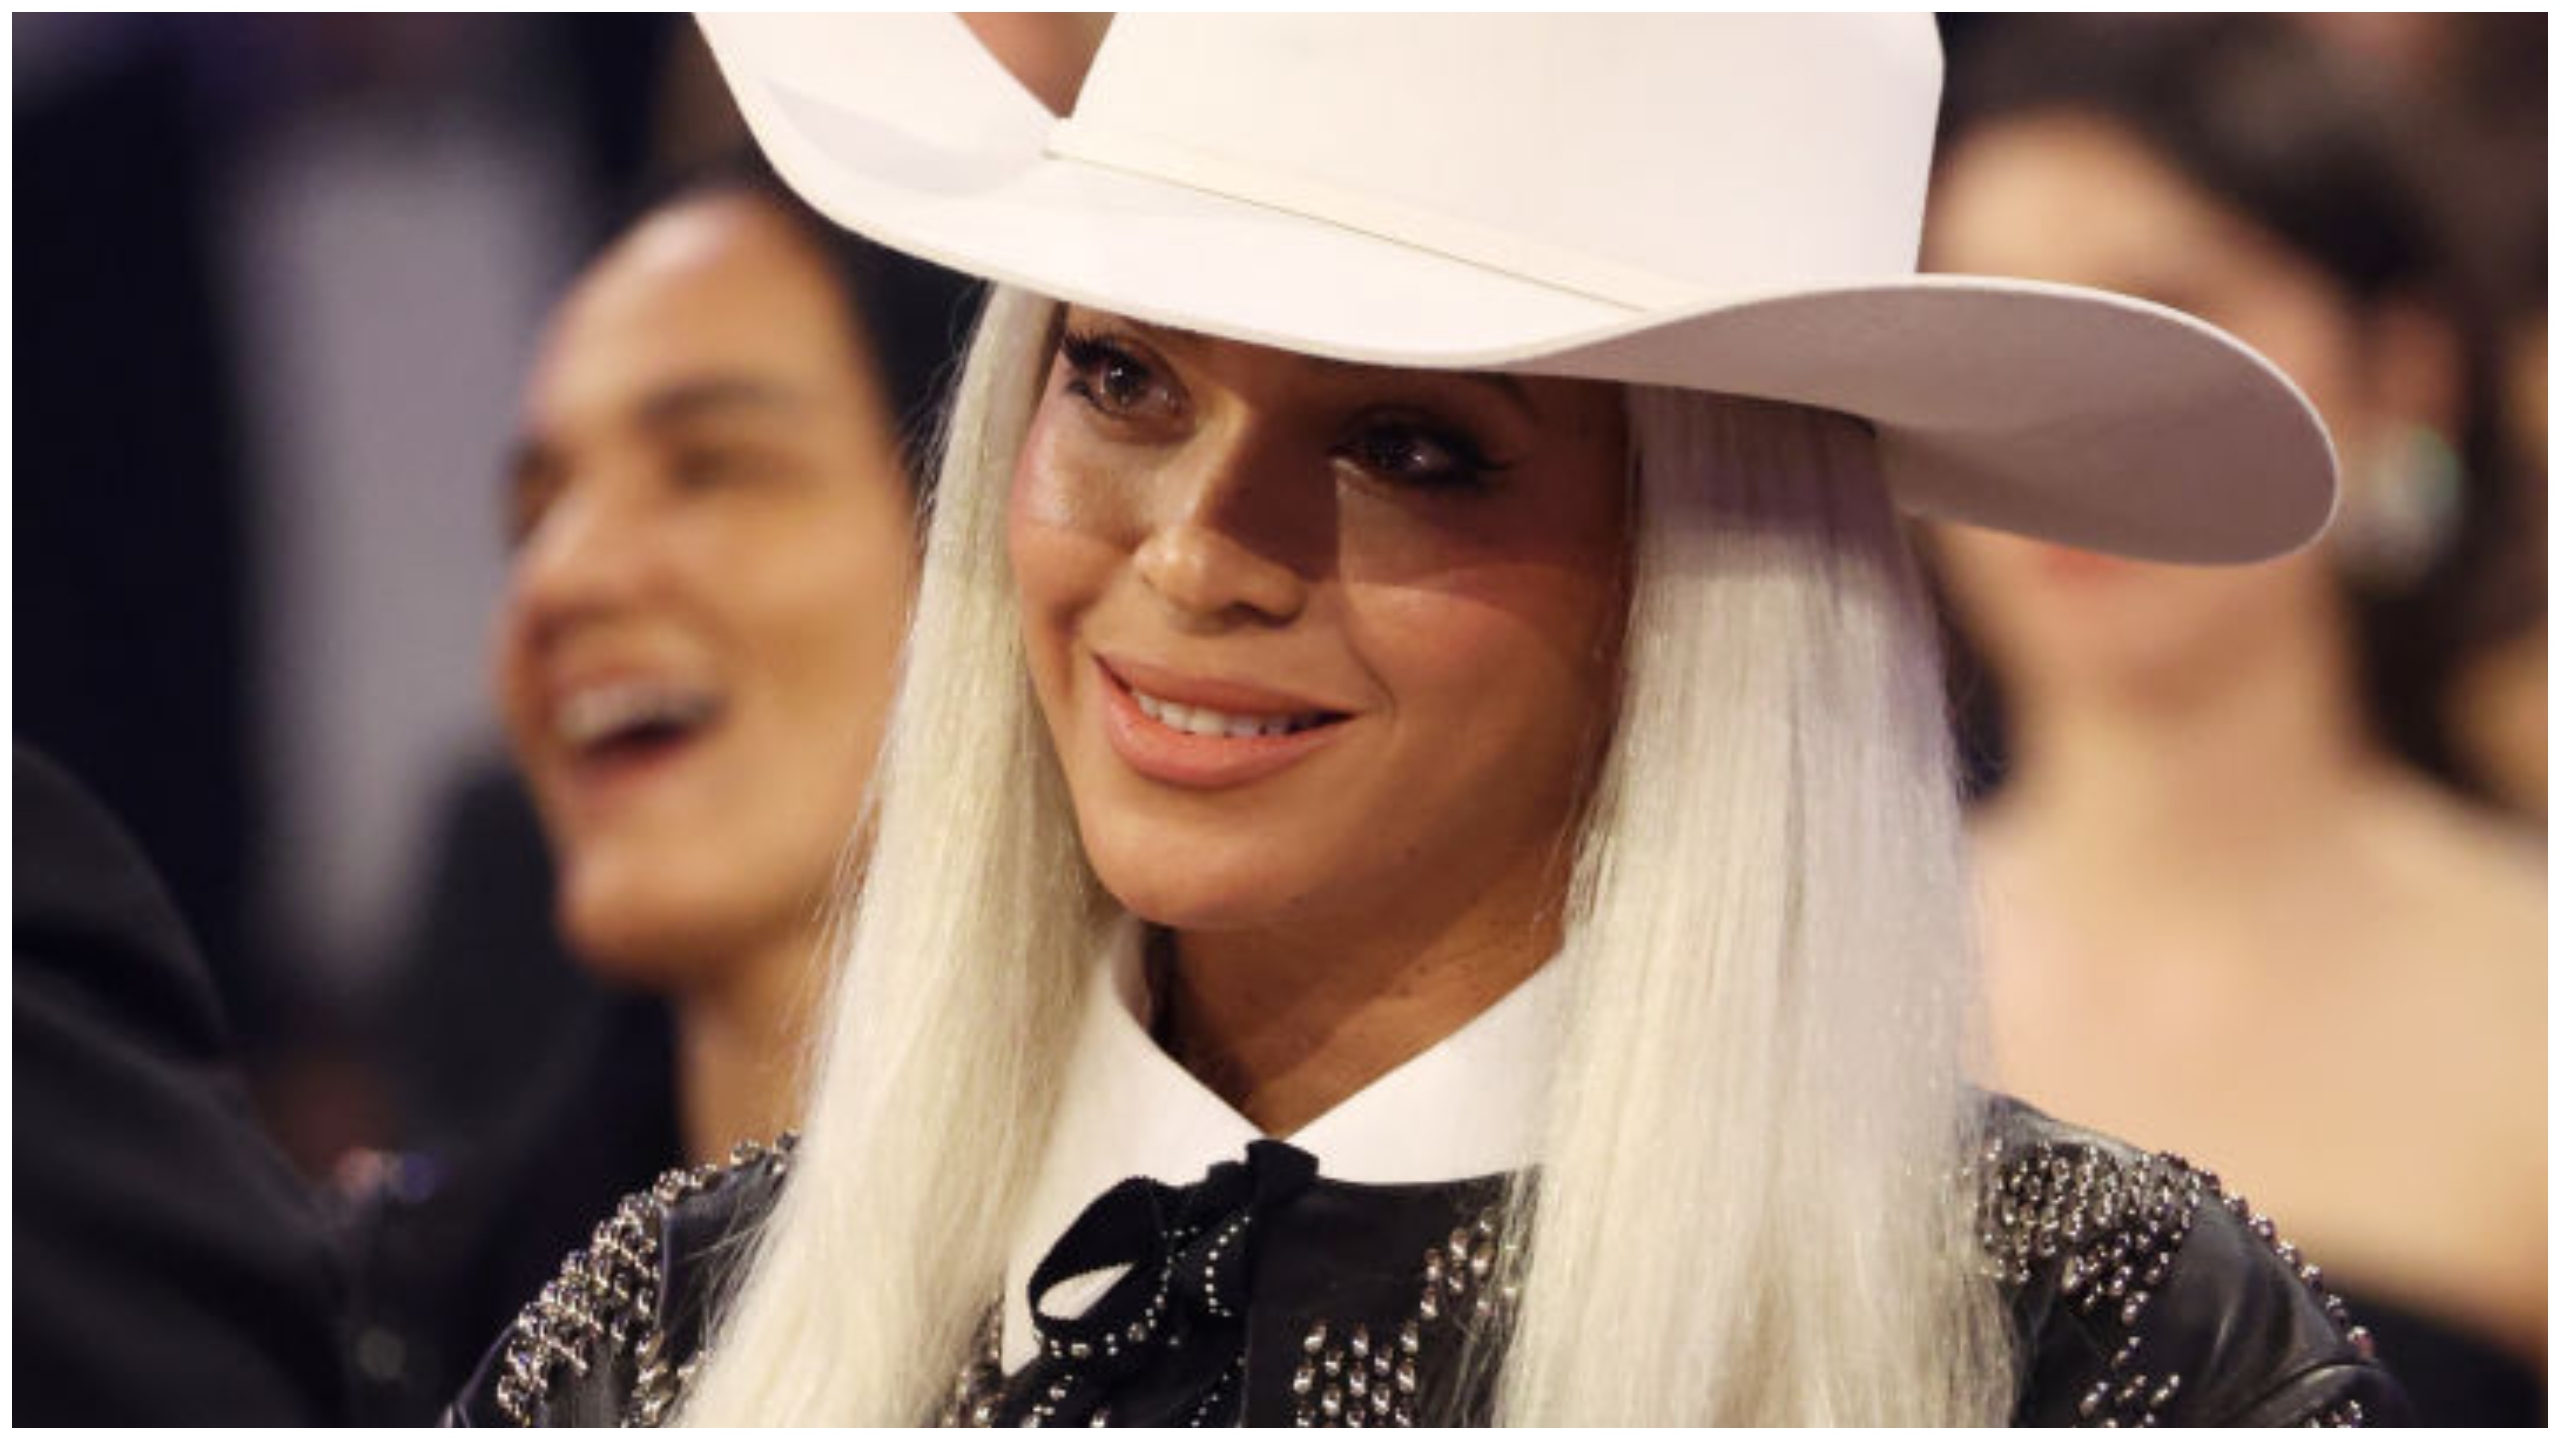 Beyoncé Makes History Again: She Is The First Black Woman To Be Number 1 On The Country Charts